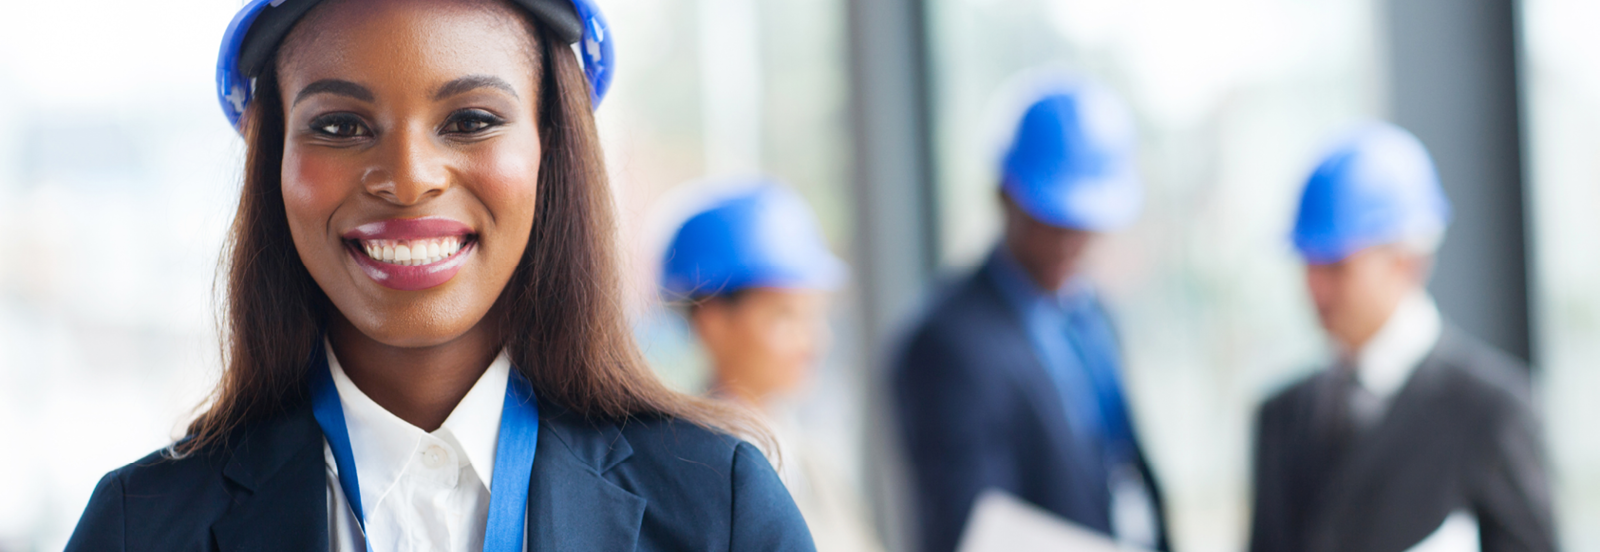 picture of woman in a hard hat with people in the background